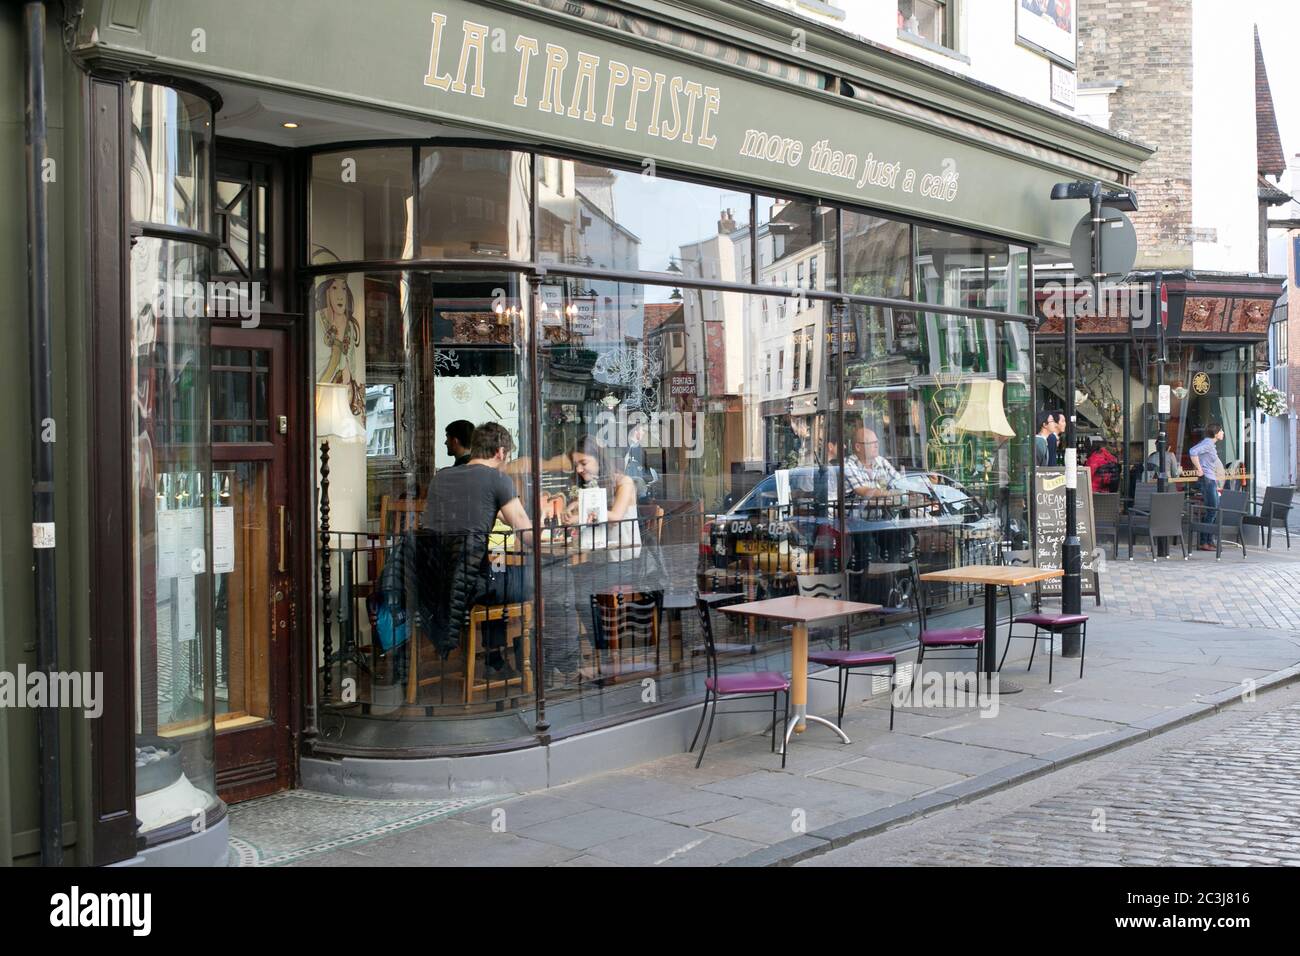 Customers dining outside al fresco at La Trappiste on Sun Street in Canterbury, Kent. Stock Photo